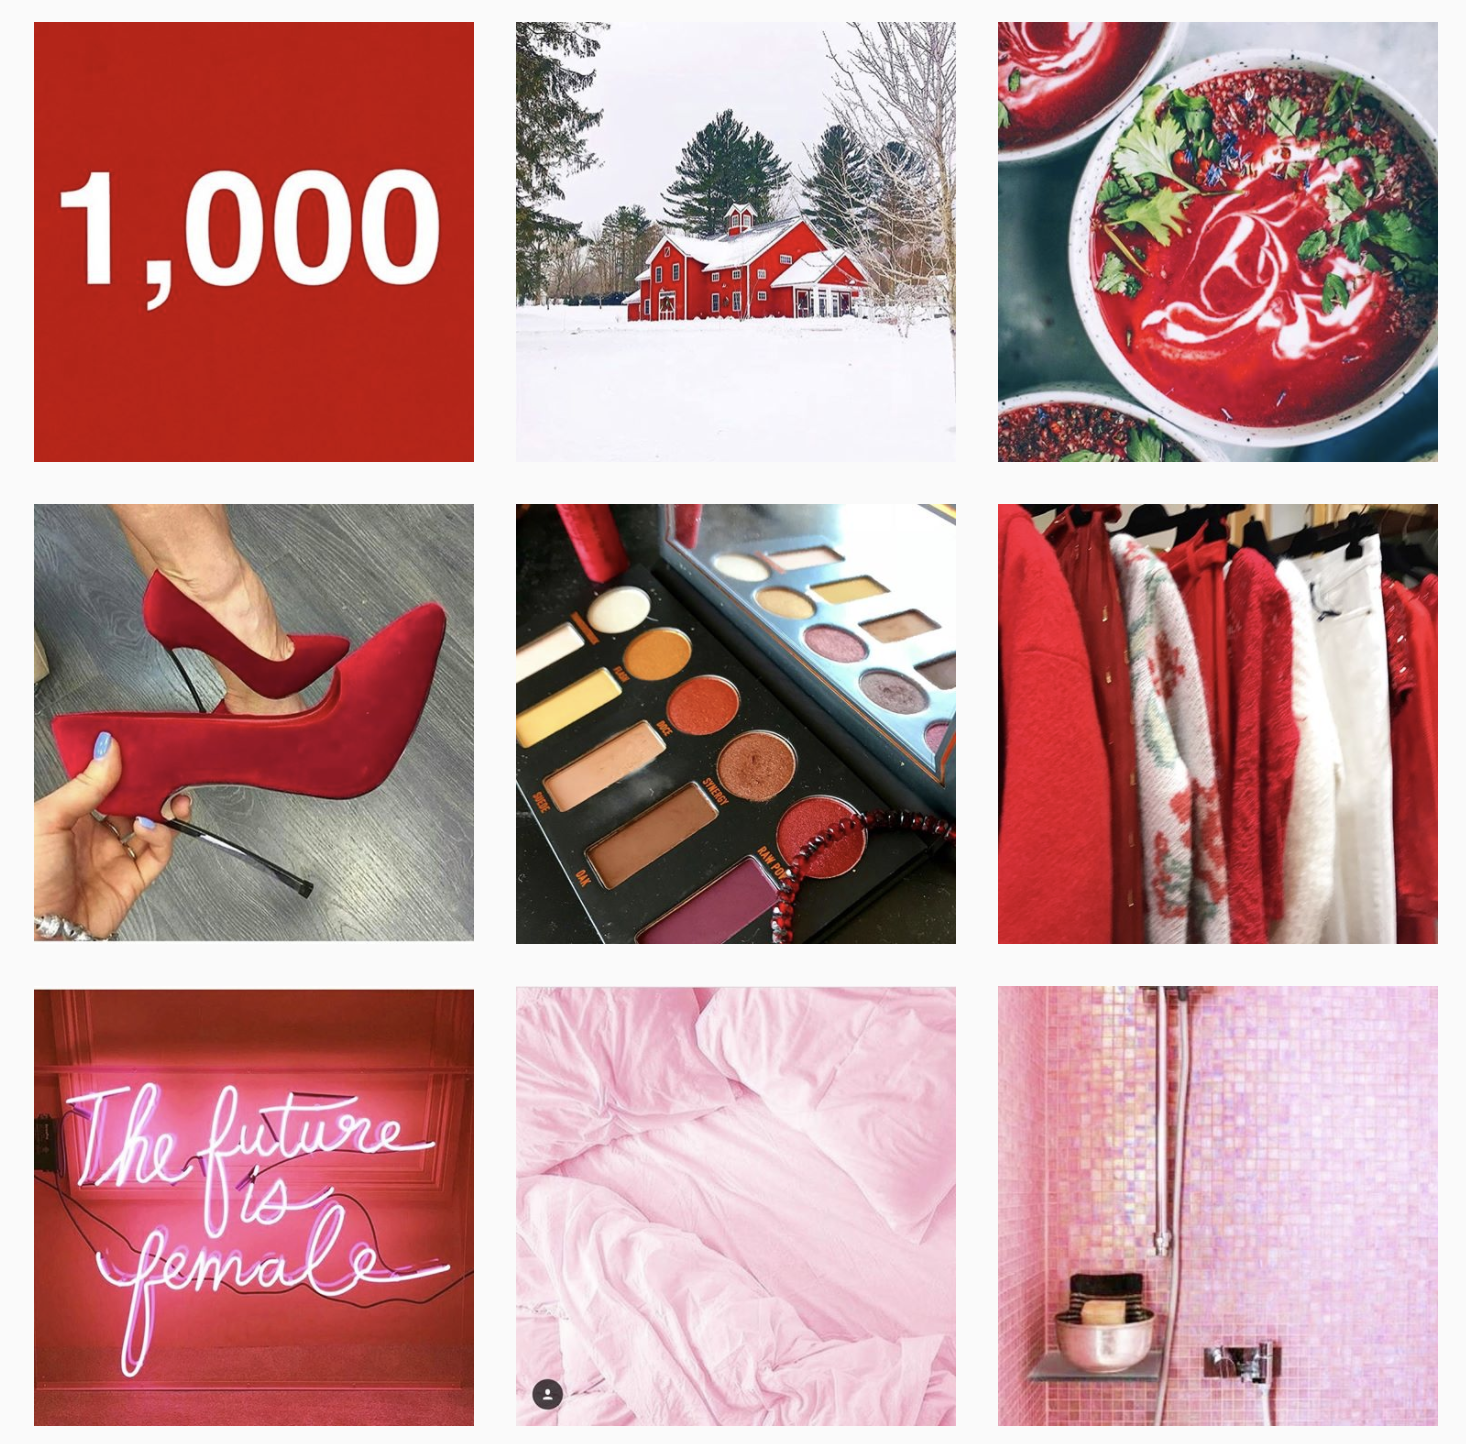 9 Brilliant Instagram Feed Ideas That Can Make Your Profile Standout